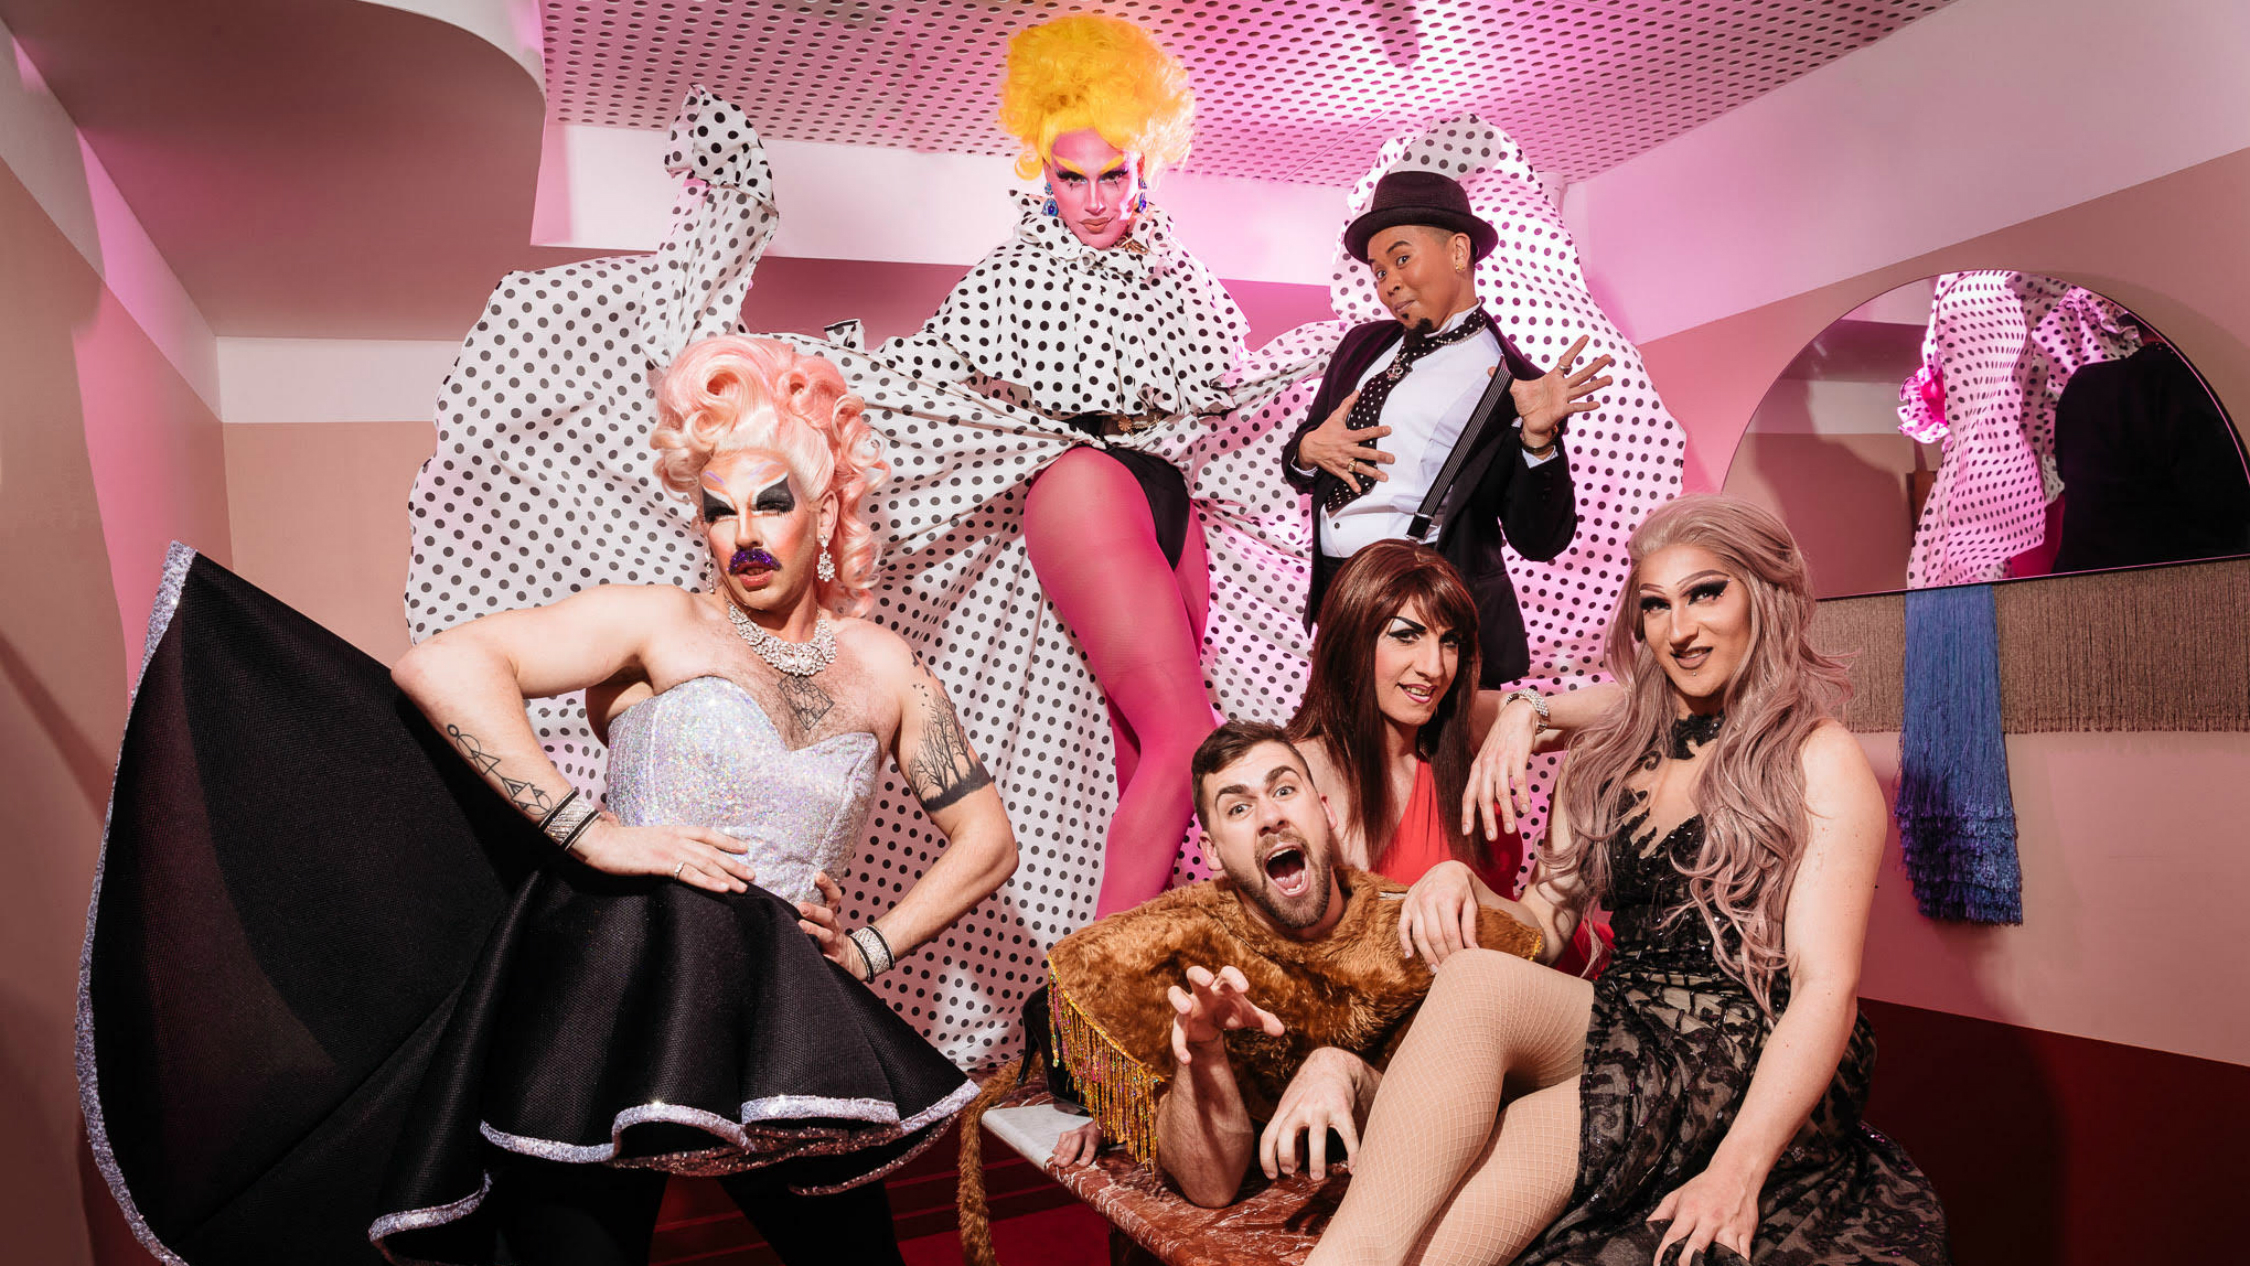 The best places to see drag shows in Sydney